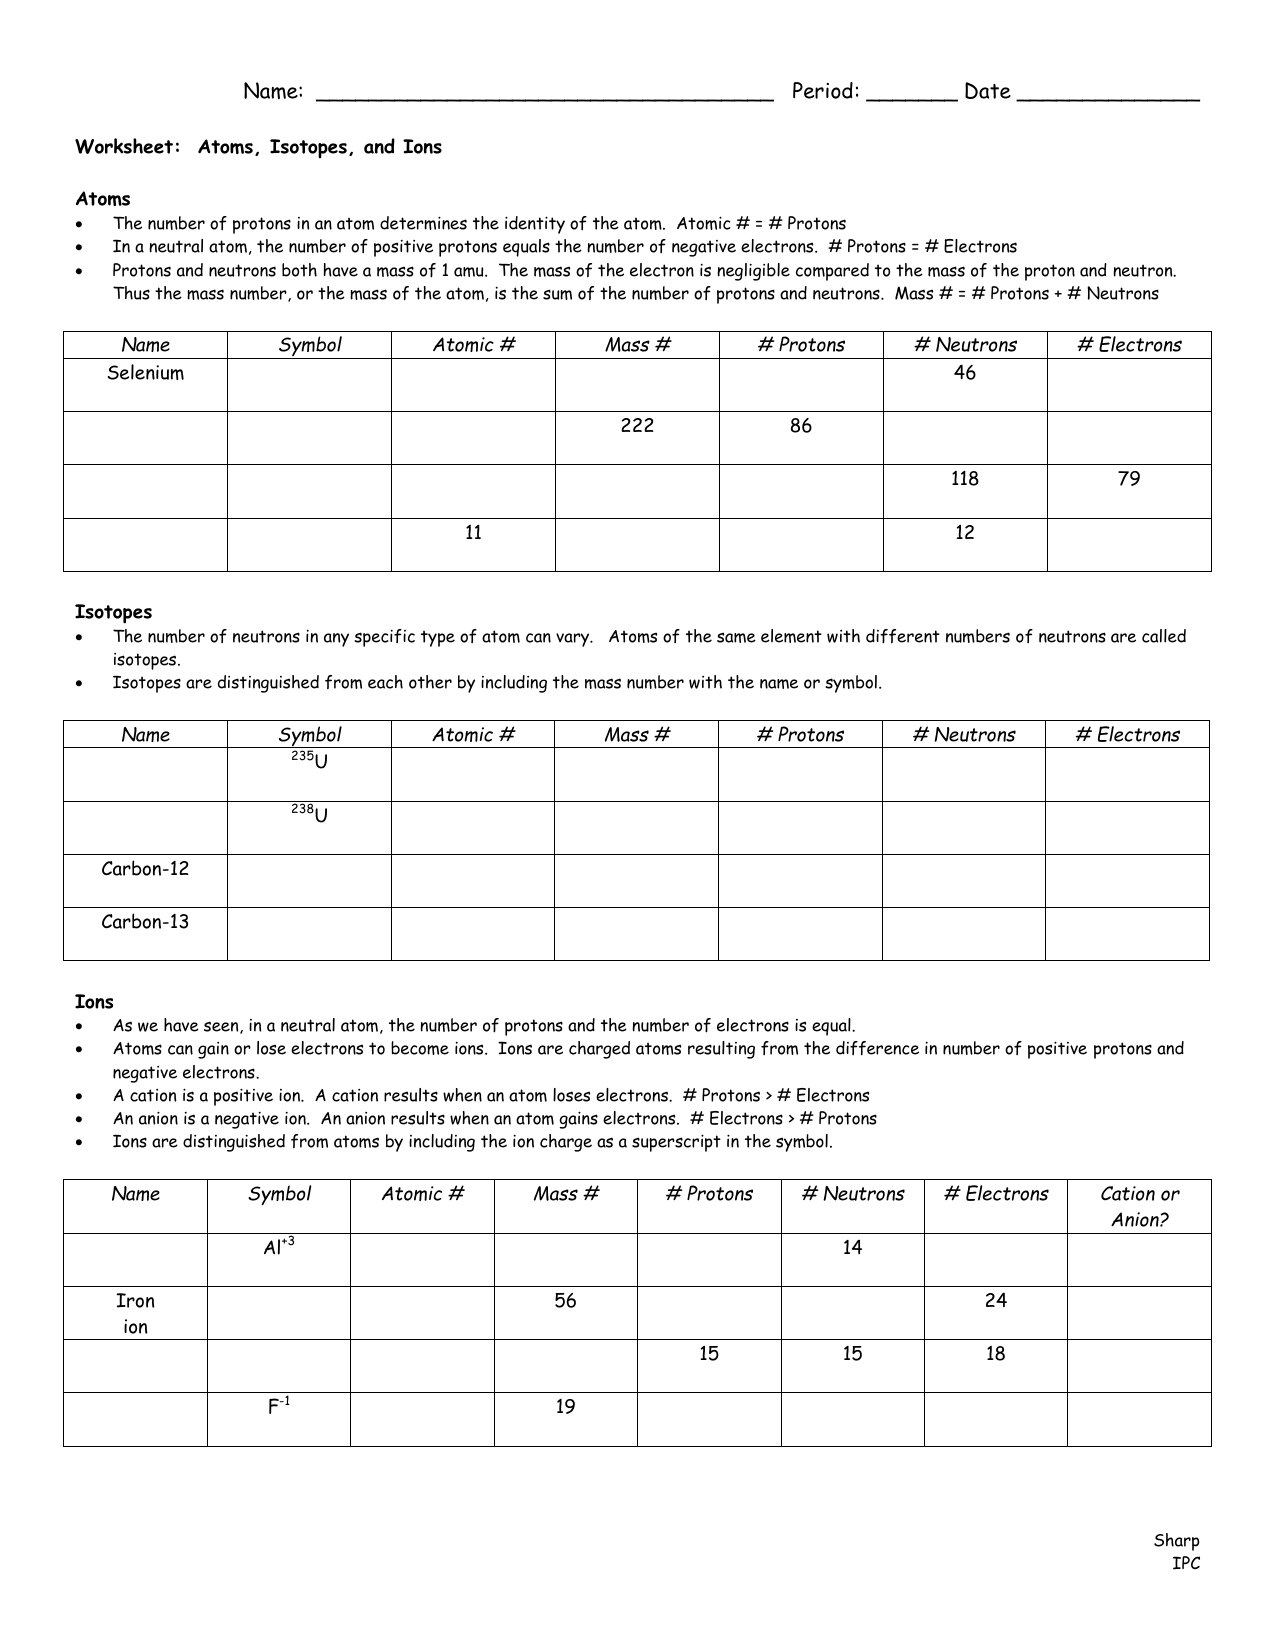 Atoms, Isotopes, & Ions Worksheet For Isotopes Ions And Atoms Worksheet